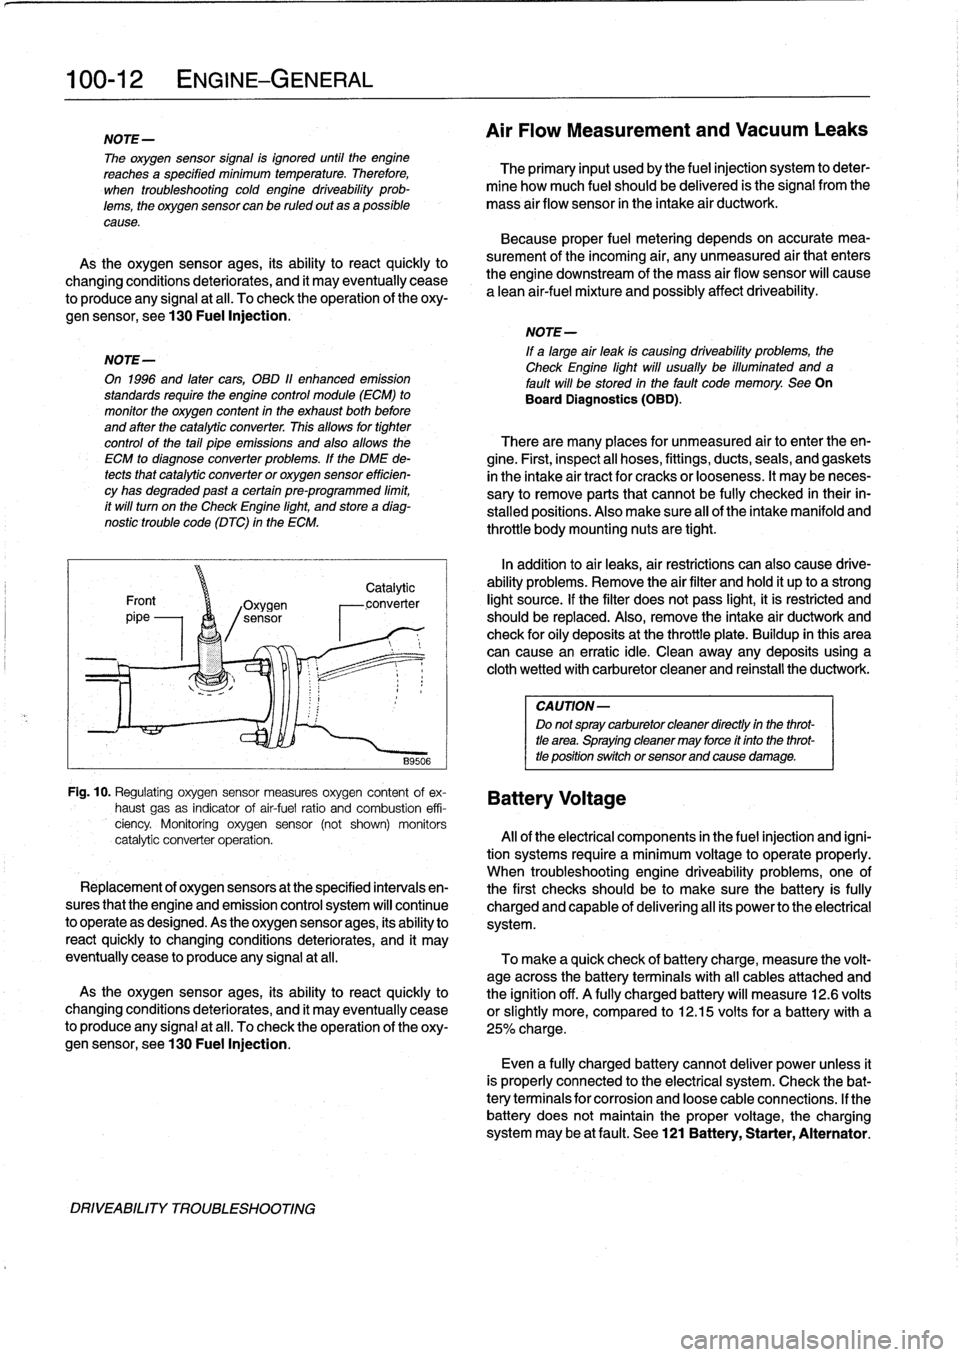 BMW 318i 1997 E36 Workshop Manual 
100-
1
2
ENGINE-GENERAL

NOTE-

The
oxygen
sensor
signal
is
ignored
until
the
engine
reachesa
specified
minimum
temperature
.
Therefore,

	

The
primary
input
usedby
the
fuel
injection
system
to
dete